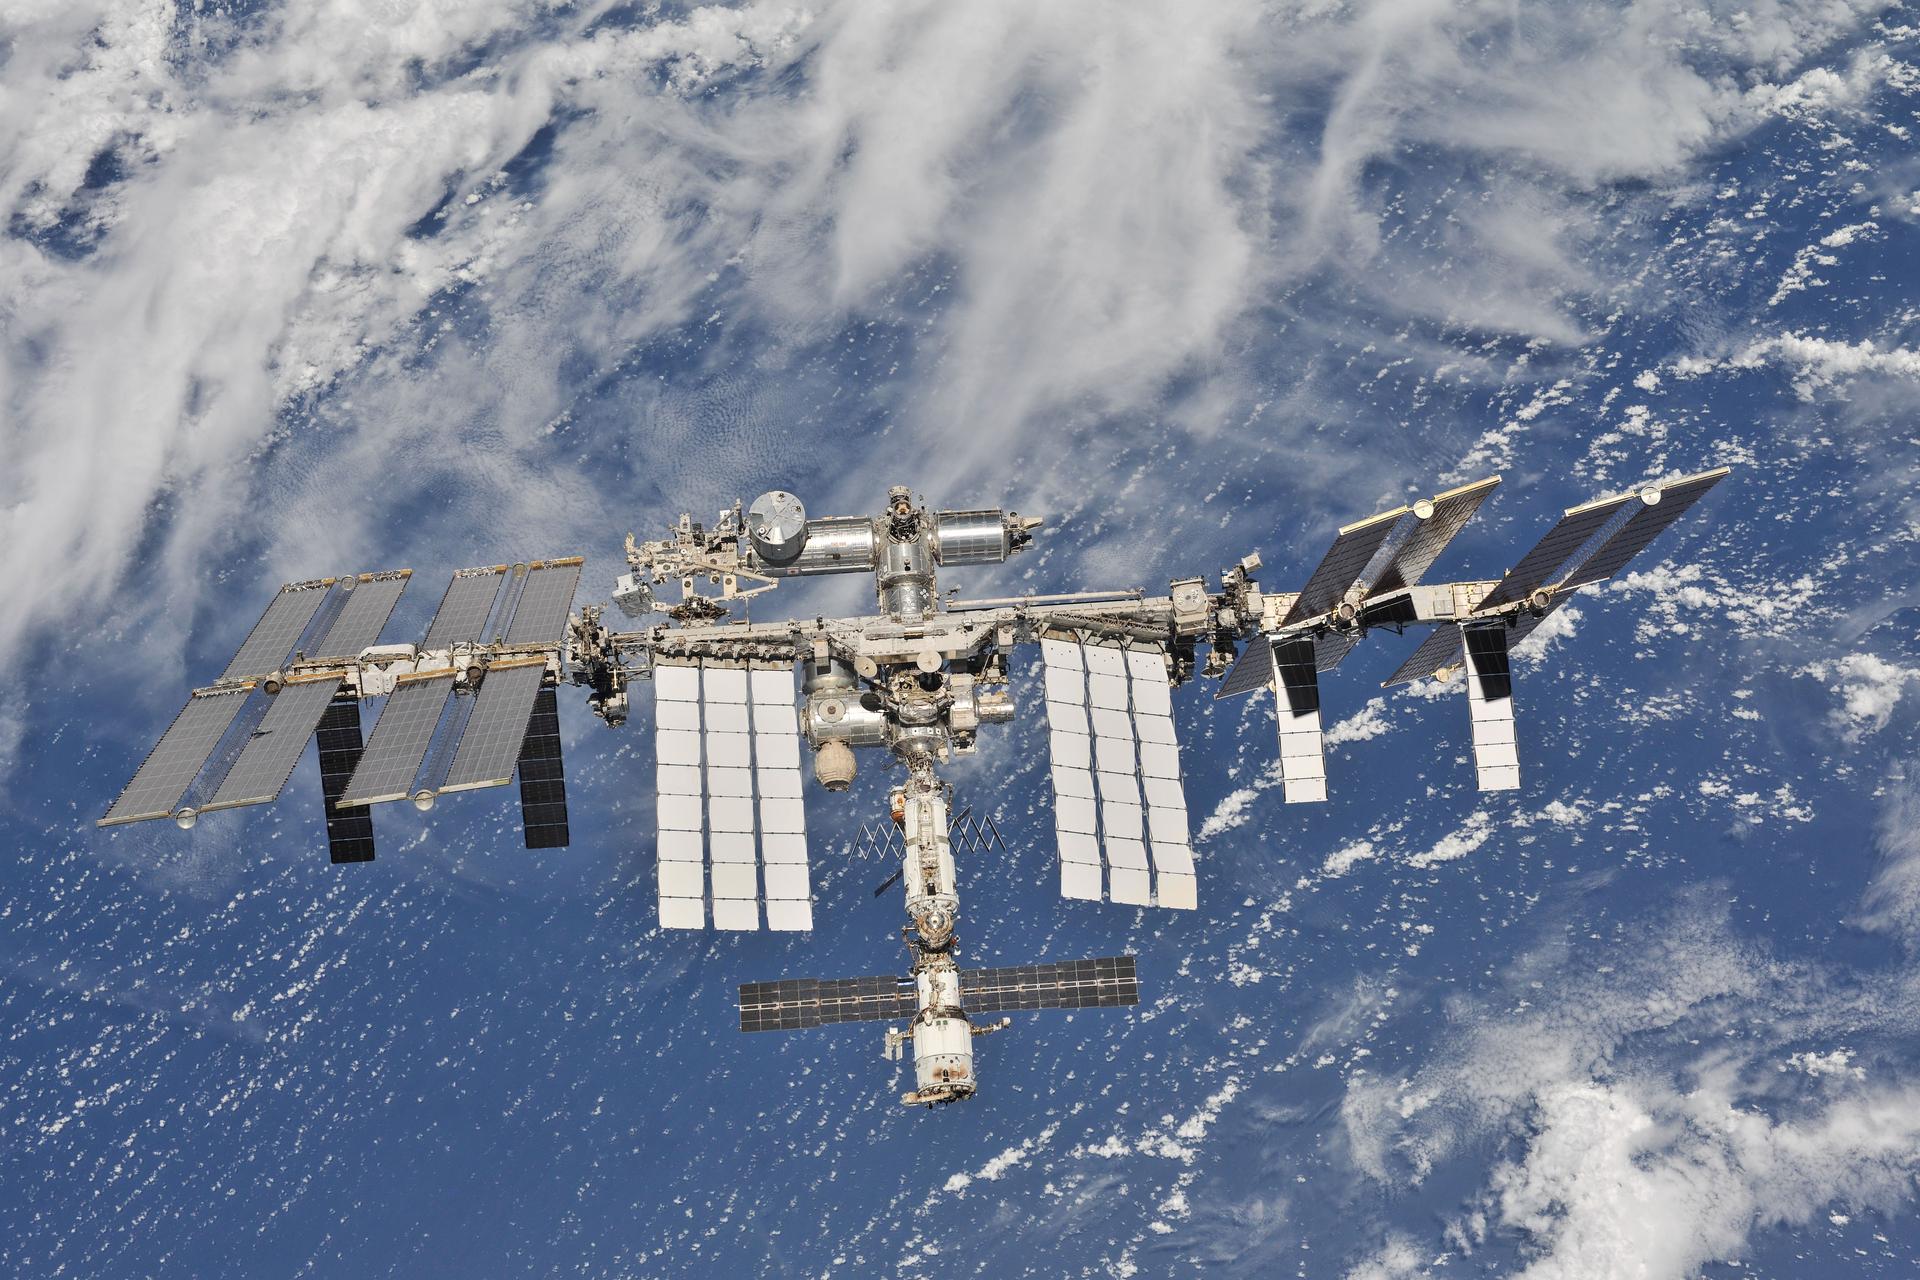 Space station successors may not be ready in time to replace aging lab: report